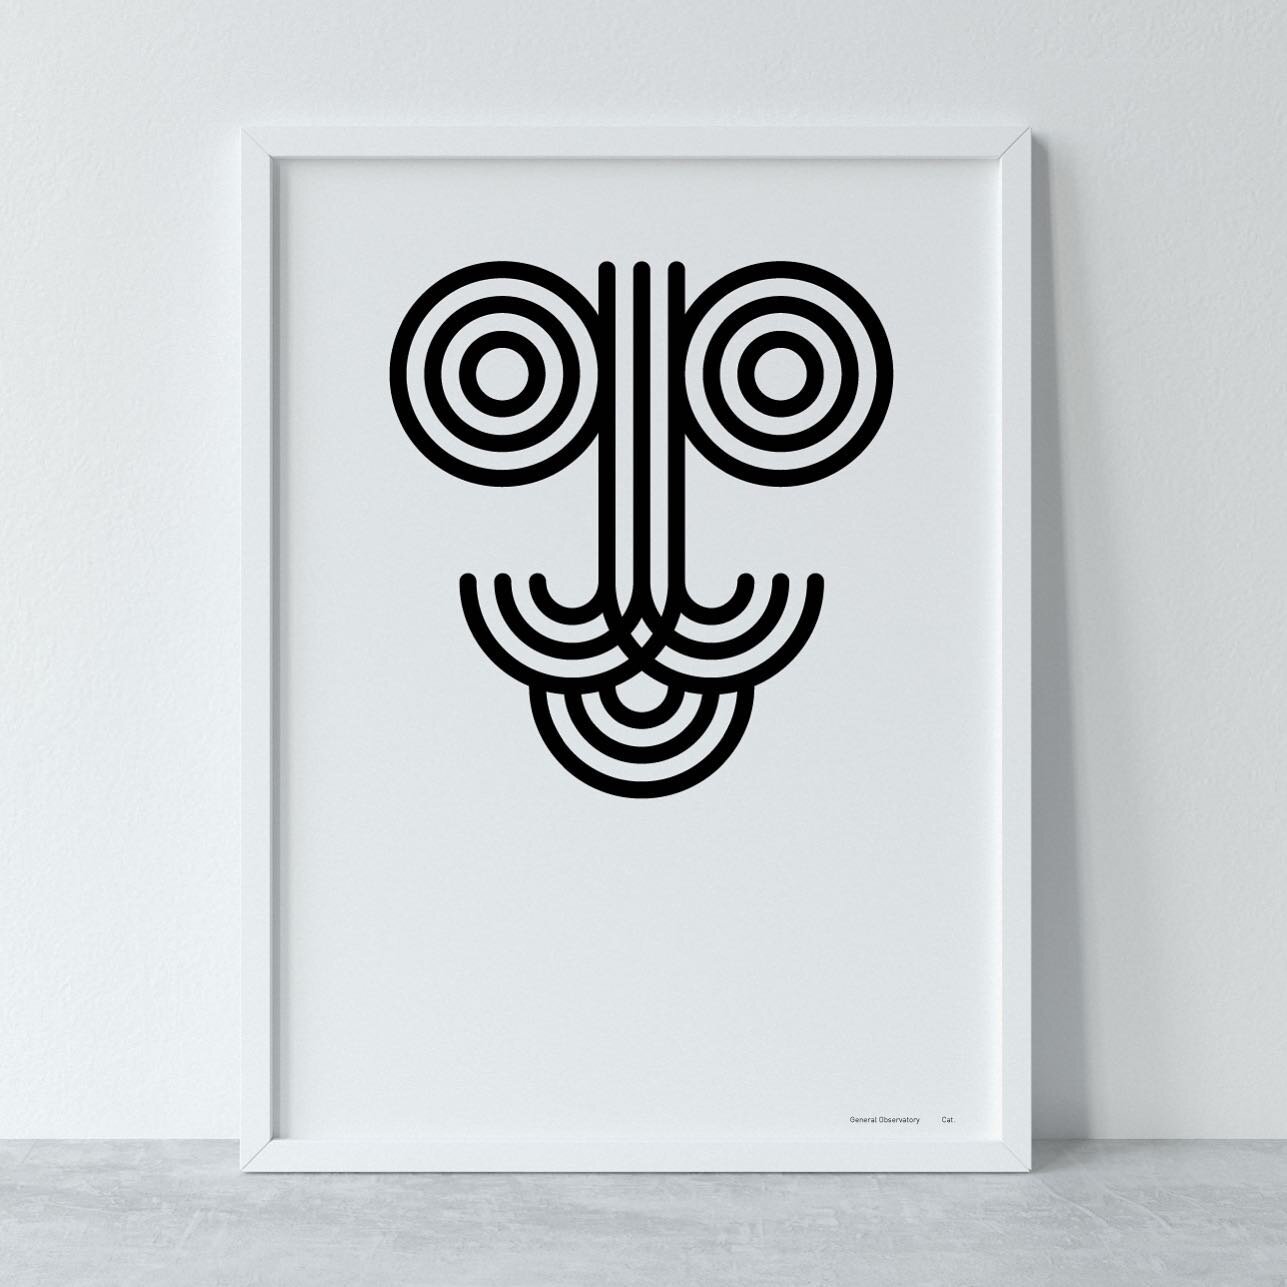 Cat - a minimal tribal take on our feline friends. (Also available in gold)
A3 sized 190gsm matte stock. 
Available @generalobservatory 
.
.
.
.
#catart #catartwork #minimalcats #blackandwhitecats #blackandwhitecat #blackandwhitecatsofinstagram #blac